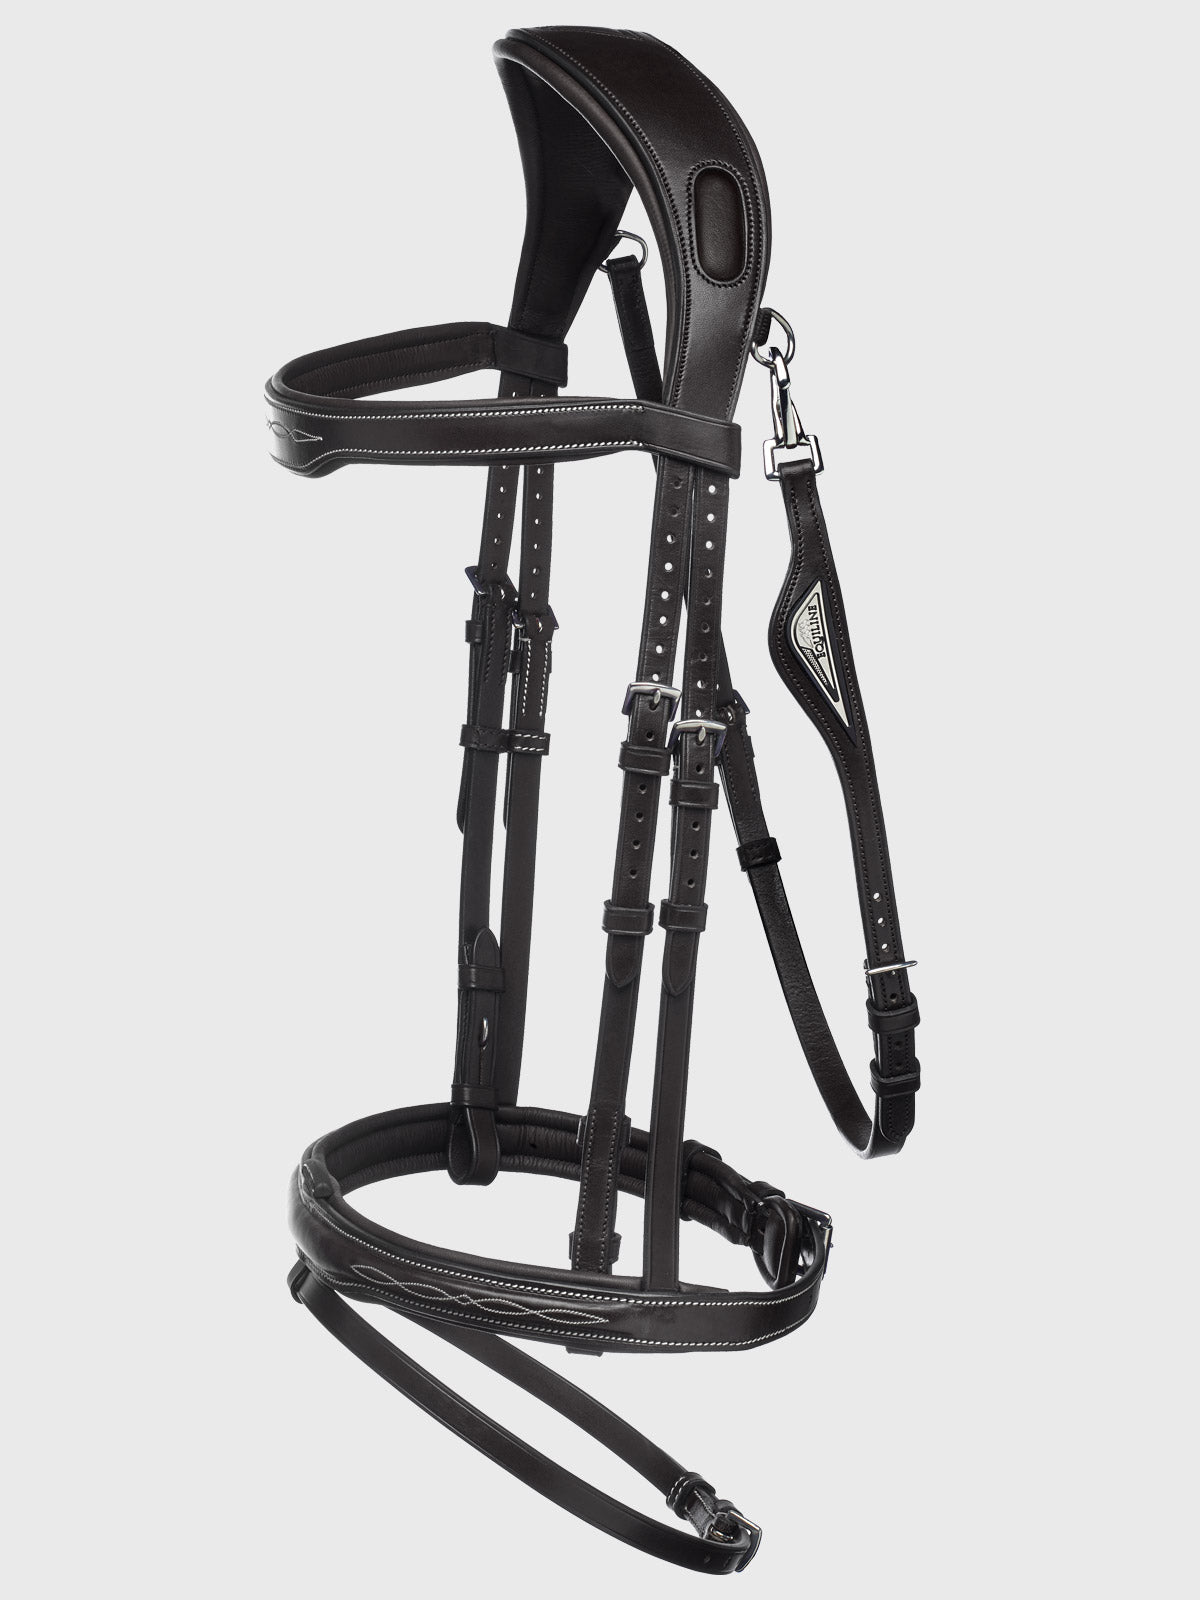 Anatomical black bridle Ready to ride Equiline